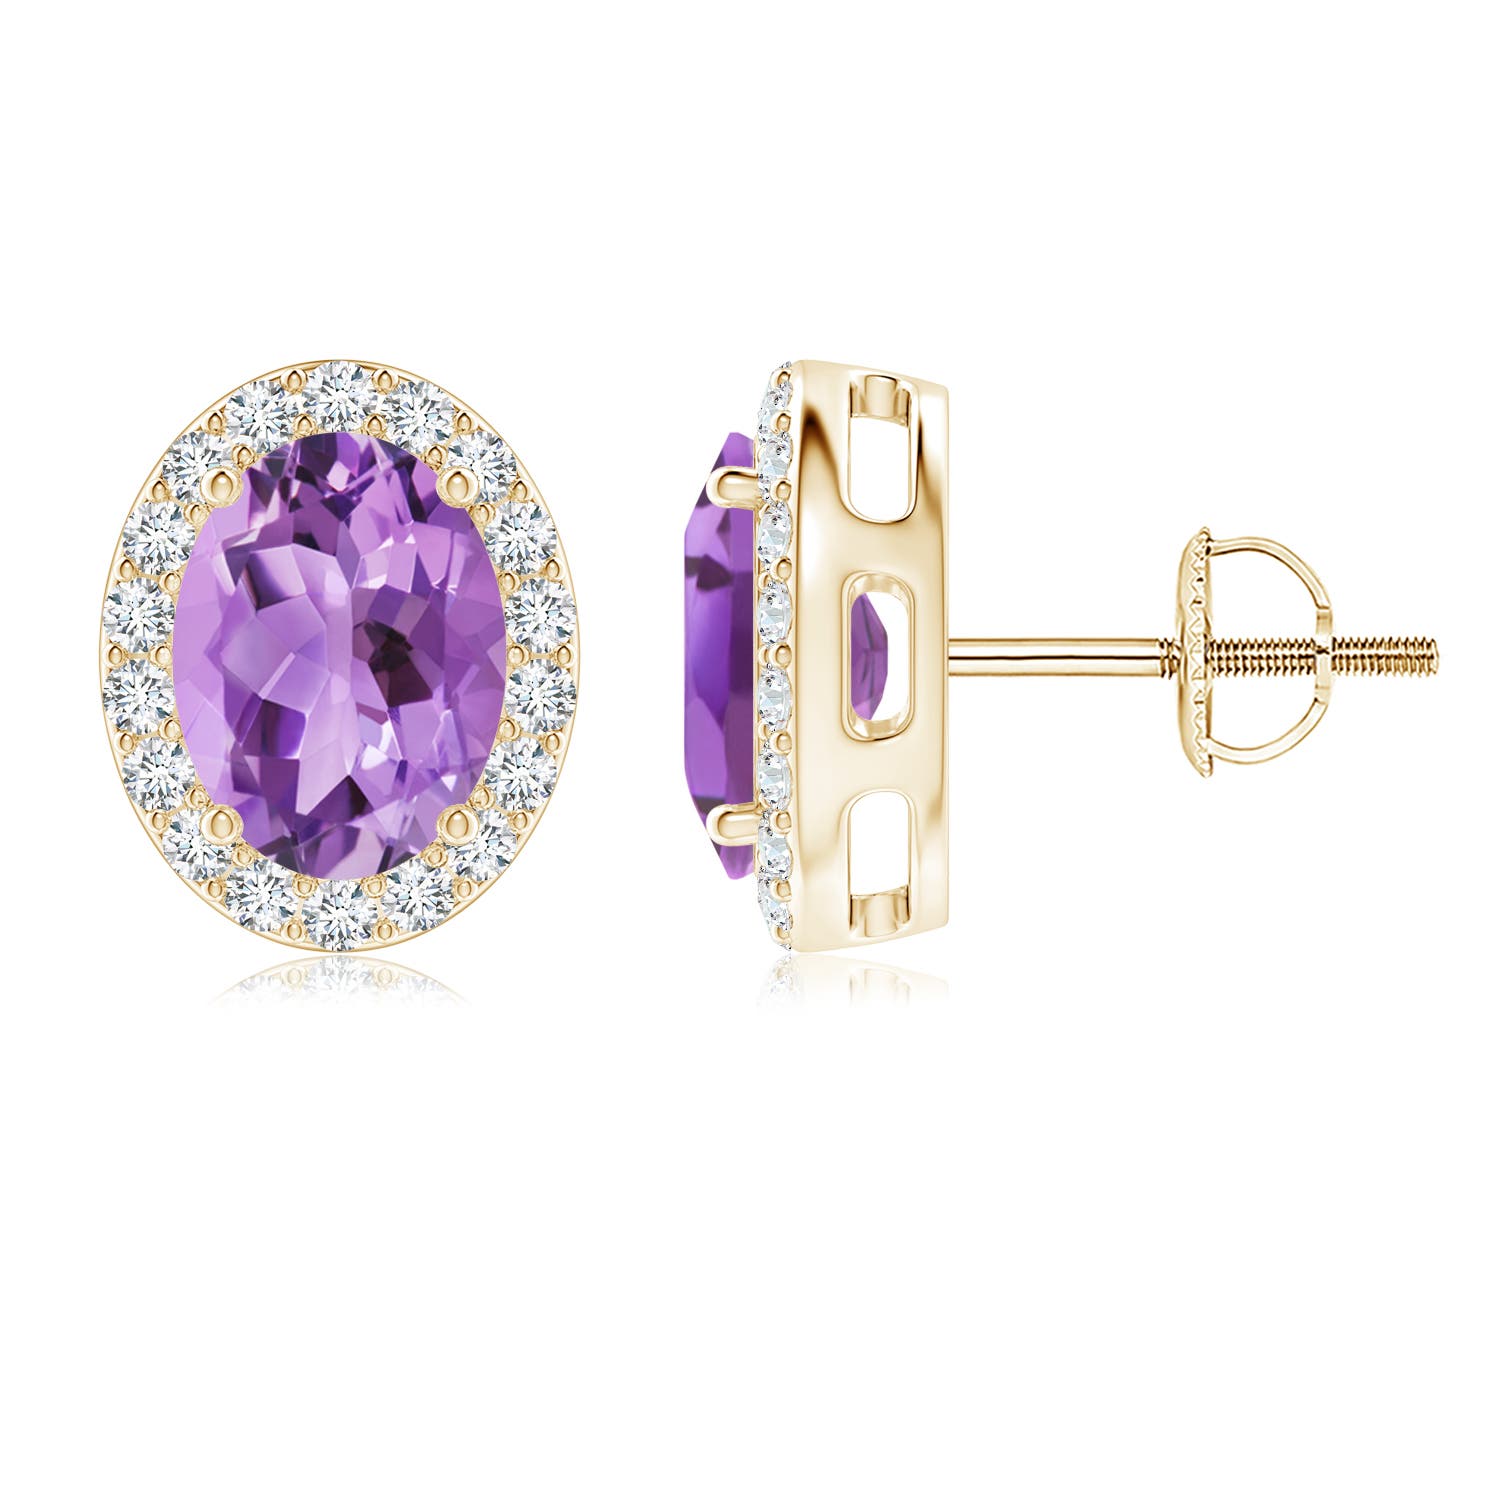 A - Amethyst / 2.66 CT / 14 KT Yellow Gold